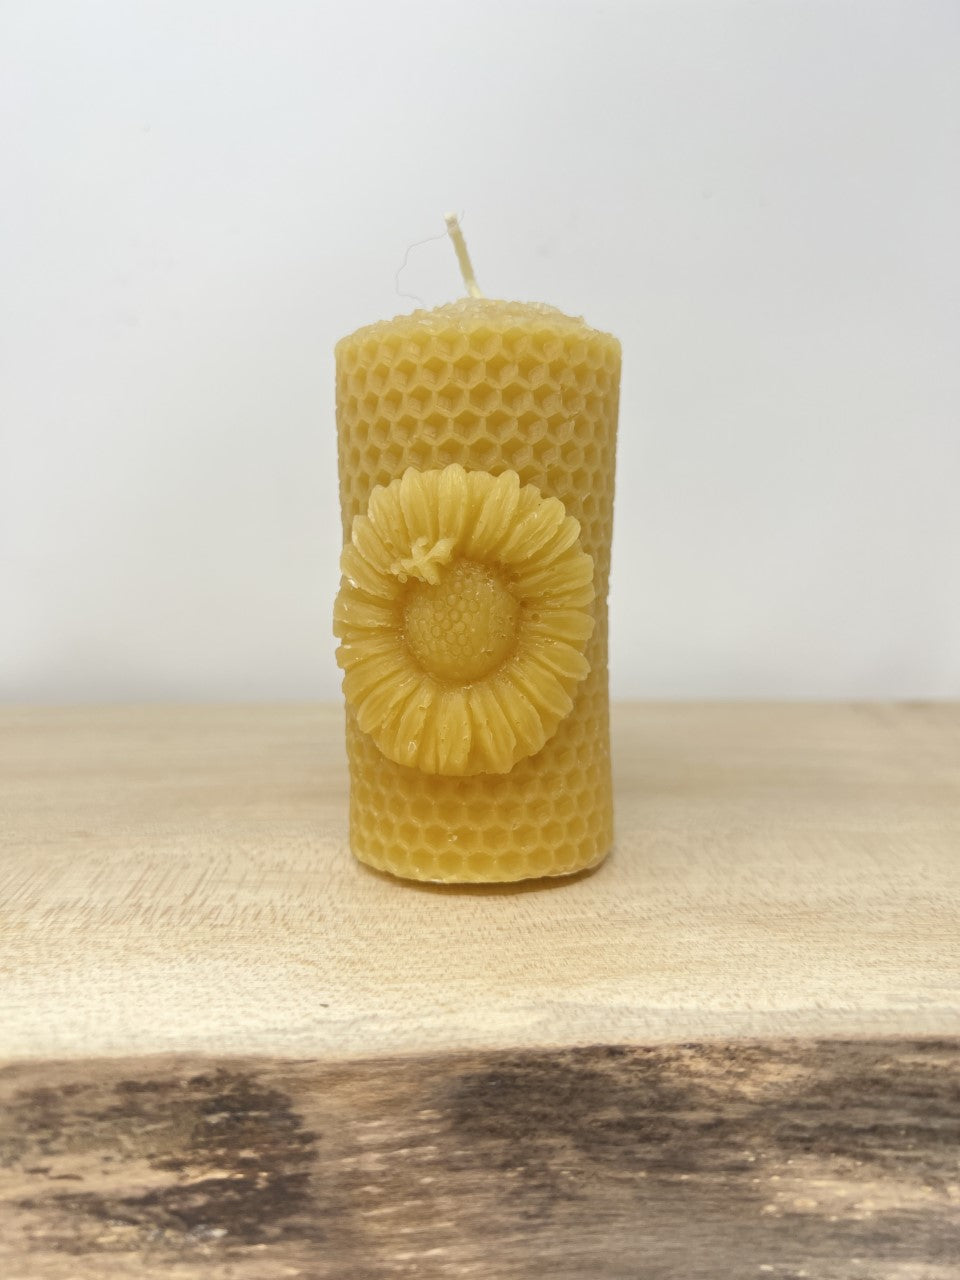 Beeswax Honeycomb & Sunflower Candle